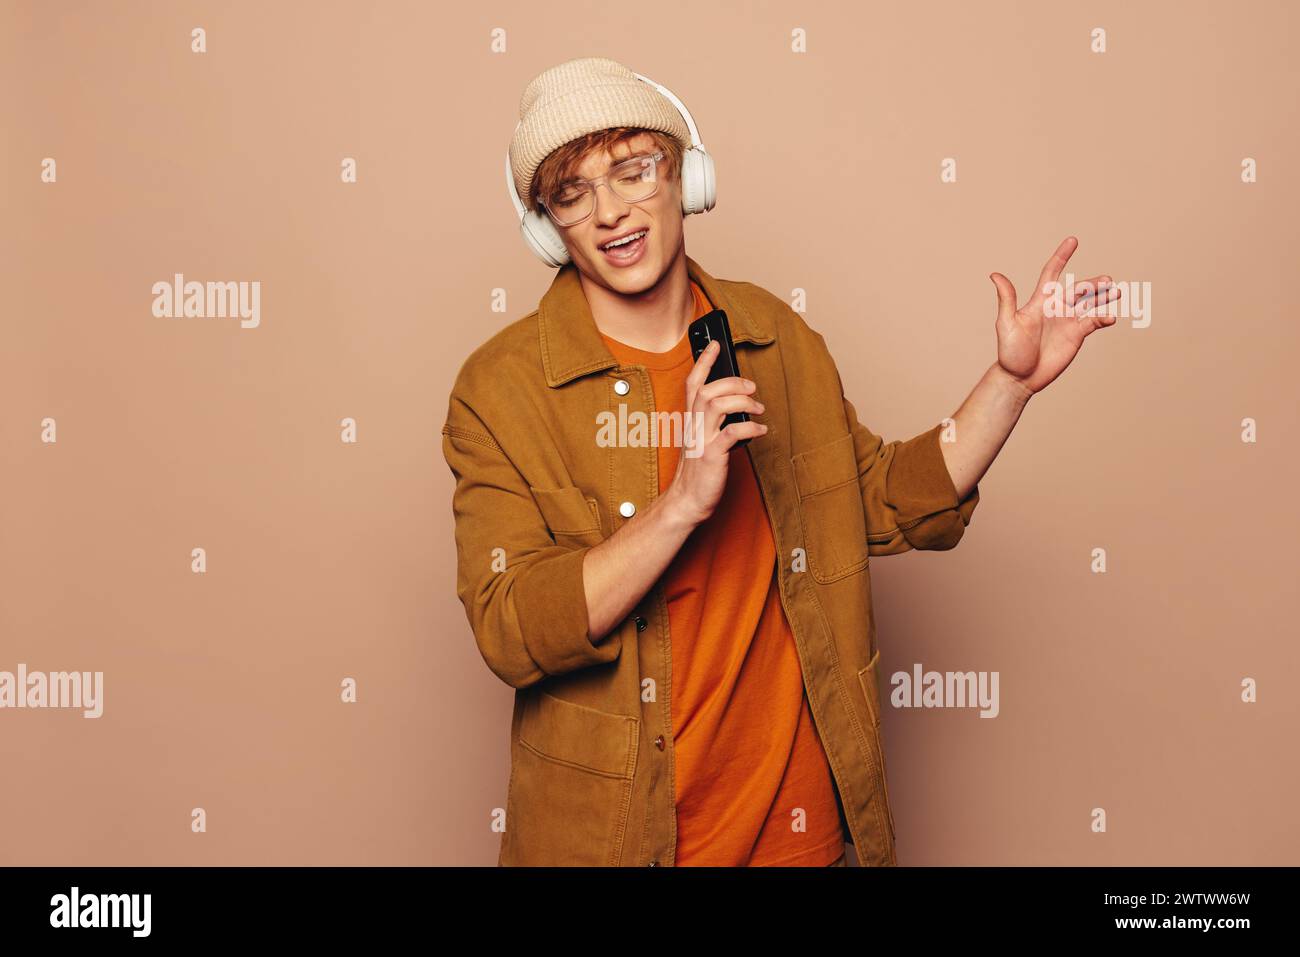 Fashionable young man stands against a vibrant peach background, holding a smartphone and wearing casual clothing. With headphones on, he sings along Stock Photo